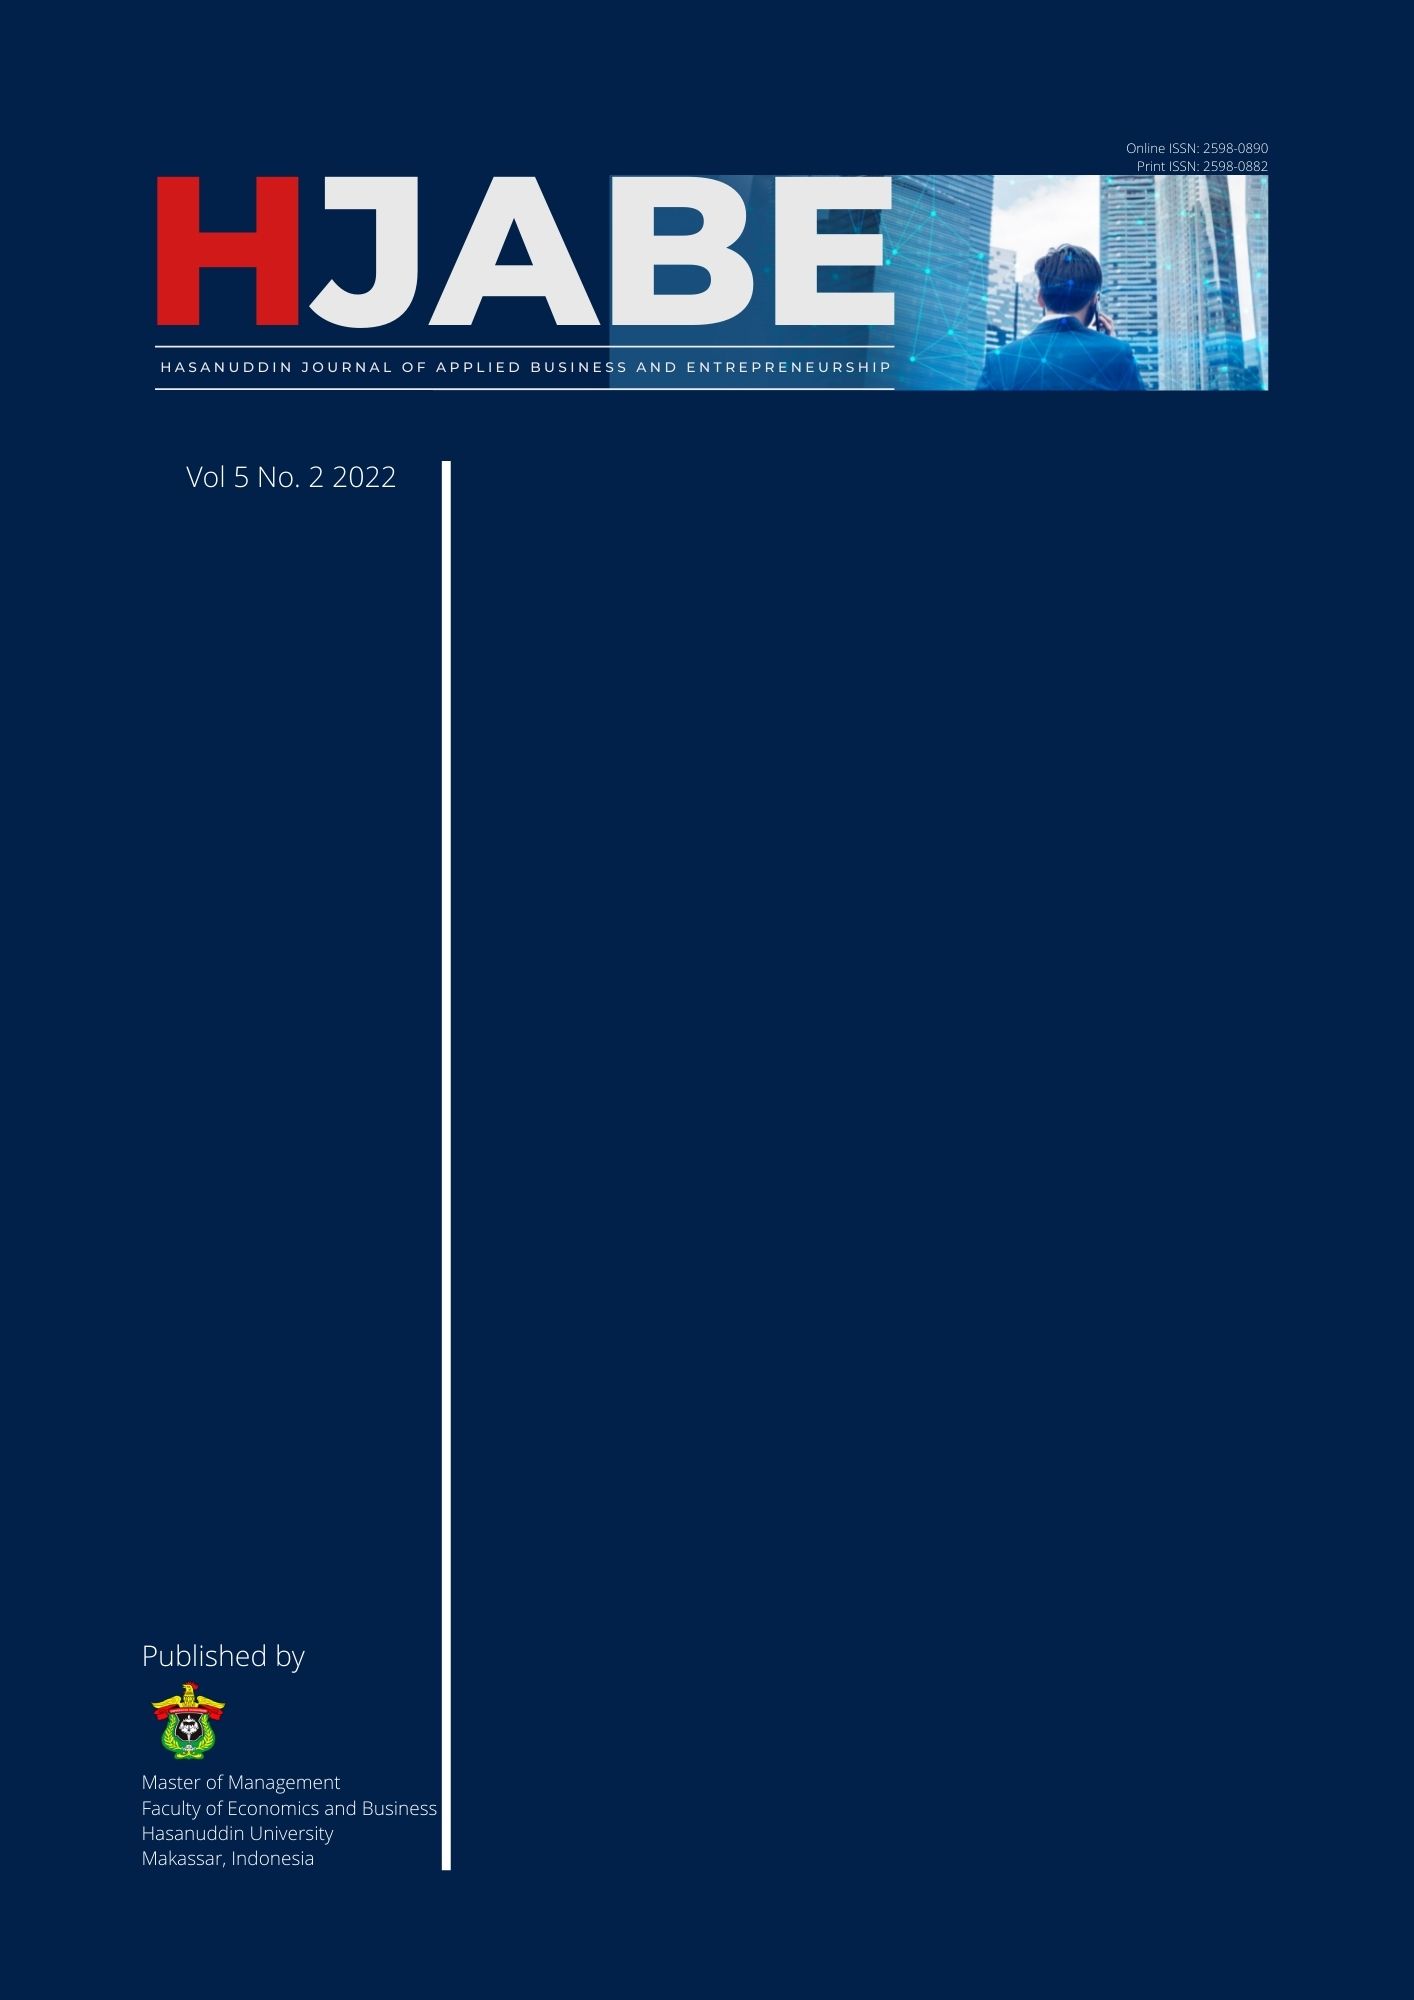 					View Vol. 5 No. 2 (2022): Hasanuddin Journal of Applied Business and Entrepreneurship
				